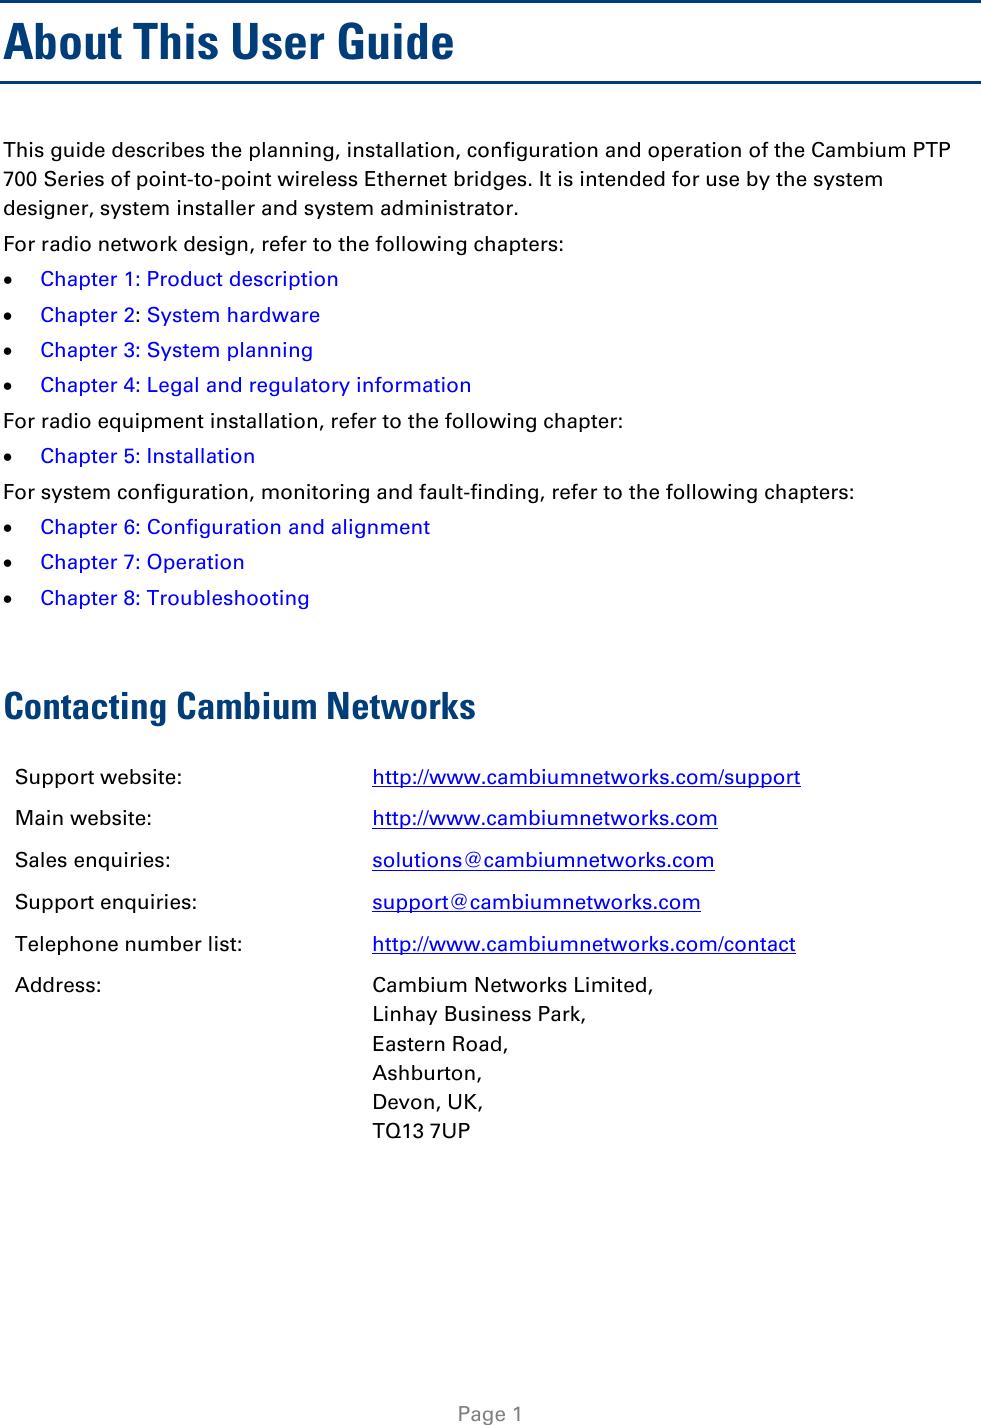  About This User Guide This guide describes the planning, installation, configuration and operation of the Cambium PTP 700 Series of point-to-point wireless Ethernet bridges. It is intended for use by the system designer, system installer and system administrator.  For radio network design, refer to the following chapters: • Chapter 1: Product description • Chapter 2: System hardware • Chapter 3: System planning • Chapter 4: Legal and regulatory information  For radio equipment installation, refer to the following chapter: • Chapter 5: Installation For system configuration, monitoring and fault-finding, refer to the following chapters: • Chapter 6: Configuration and alignment • Chapter 7: Operation • Chapter 8: Troubleshooting  Contacting Cambium Networks Support website:  http://www.cambiumnetworks.com/support Main website:  http://www.cambiumnetworks.com Sales enquiries:  solutions@cambiumnetworks.com Support enquiries:  support@cambiumnetworks.com Telephone number list: http://www.cambiumnetworks.com/contact Address:  Cambium Networks Limited, Linhay Business Park, Eastern Road, Ashburton, Devon, UK, TQ13 7UP  Page 1 